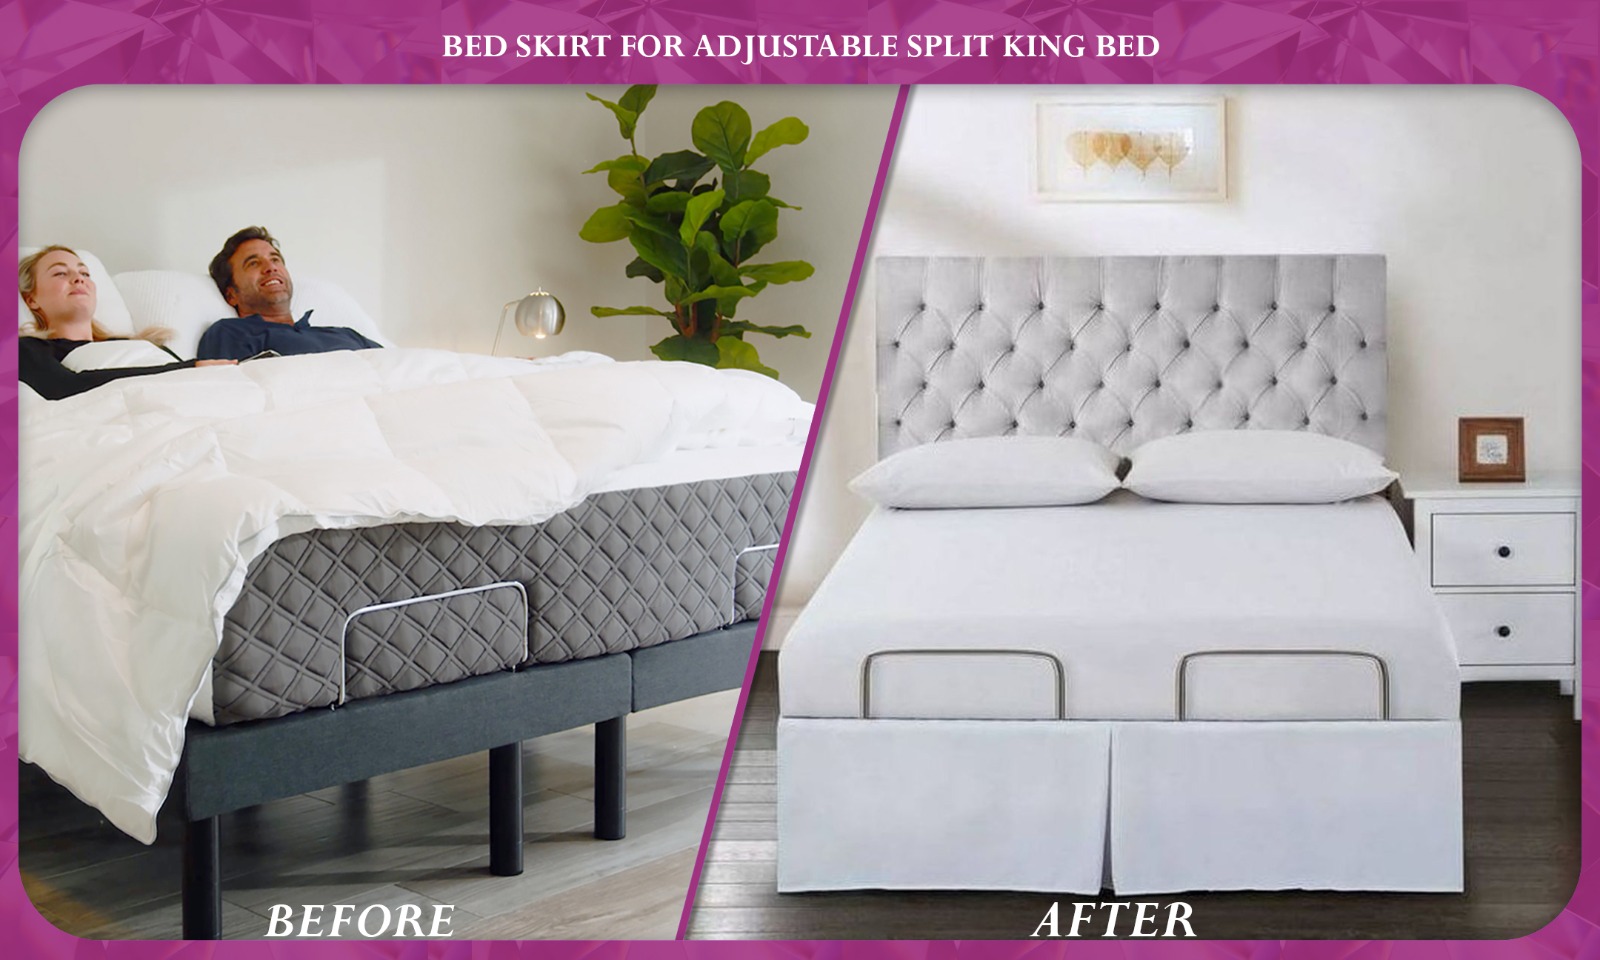 A Split King Adjustable Bed for Couples